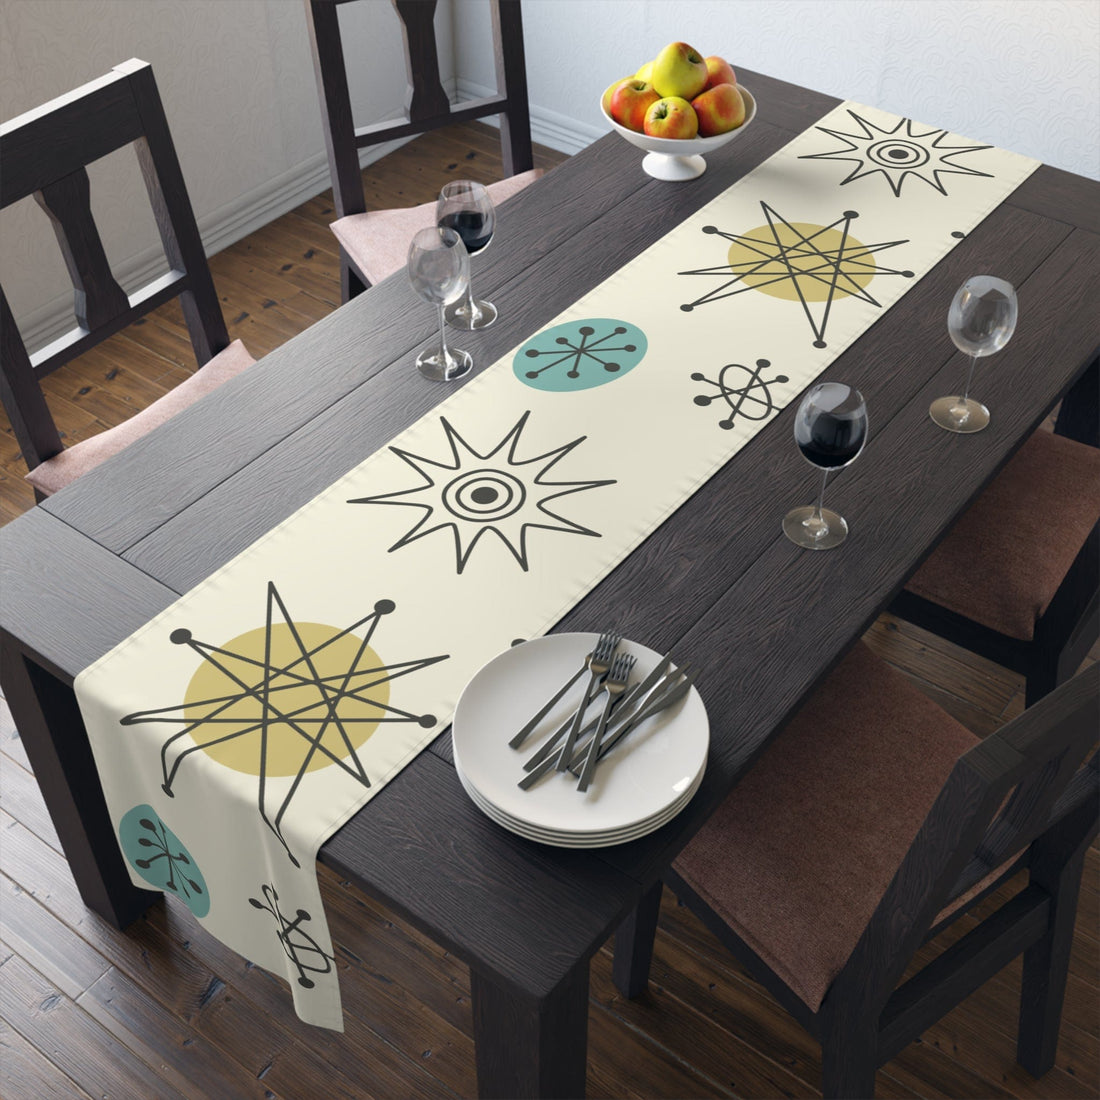 Kate McEnroe New York Classic Franciscan Starburst Table Runner, 50s Mid Century Modern Atomic Retro Cream, Aqua Blue, Green Table Linens Table Runners 16&quot; × 90&quot; / Cotton Twill 17237435393107408940